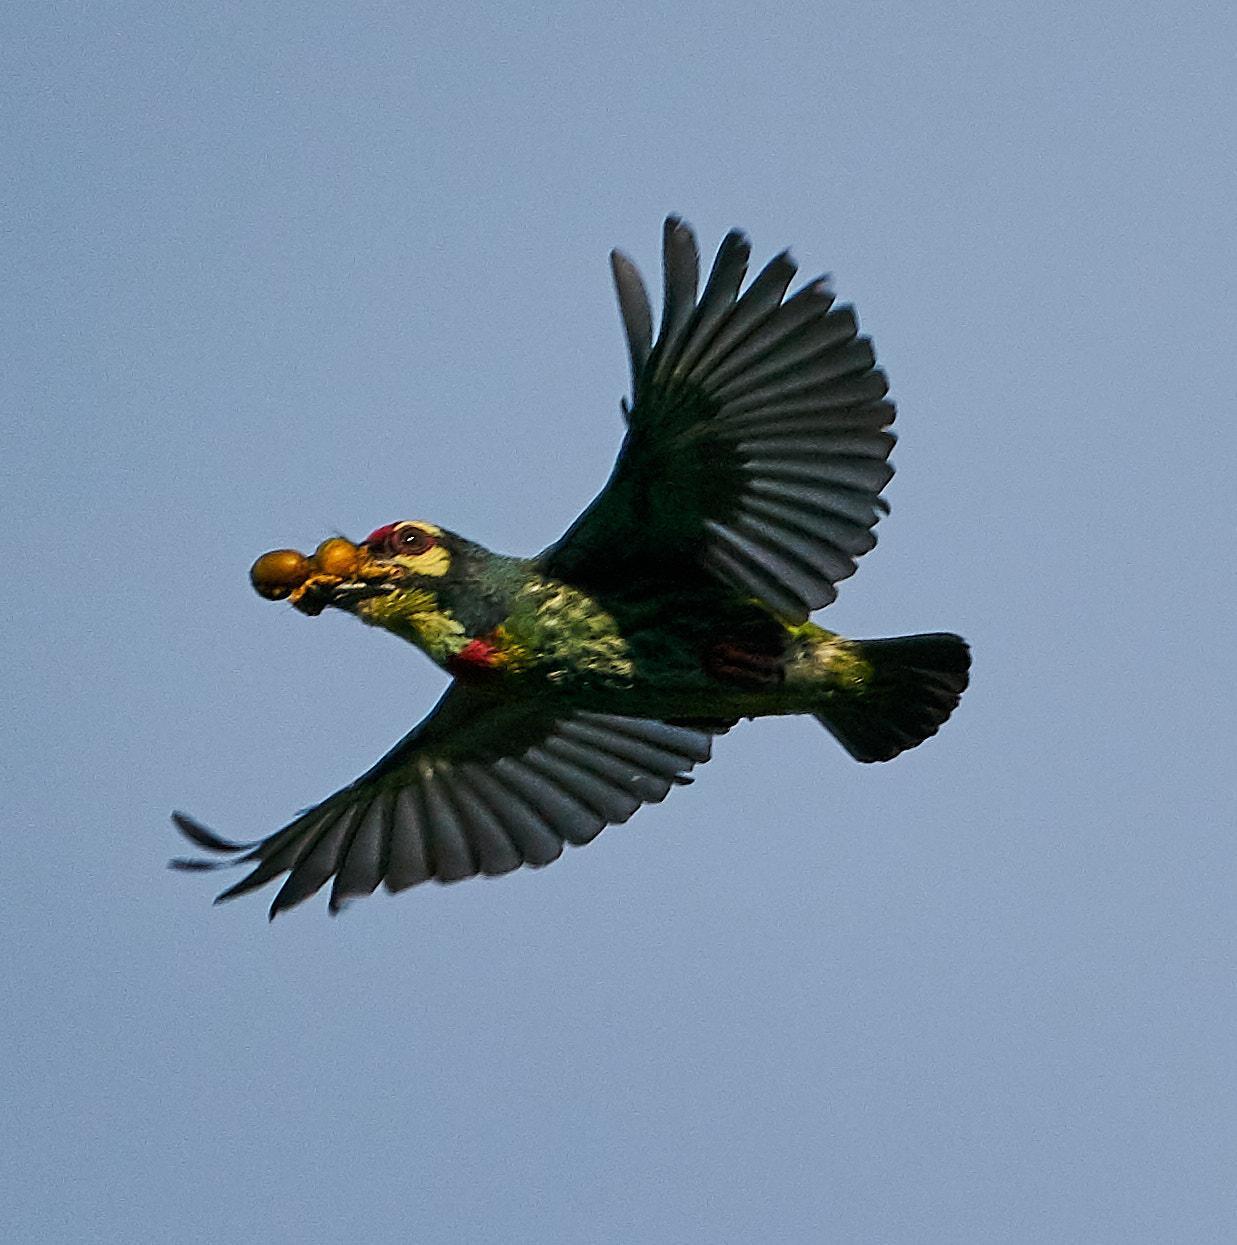 Coppersmith Barbet Photo by Steven Cheong